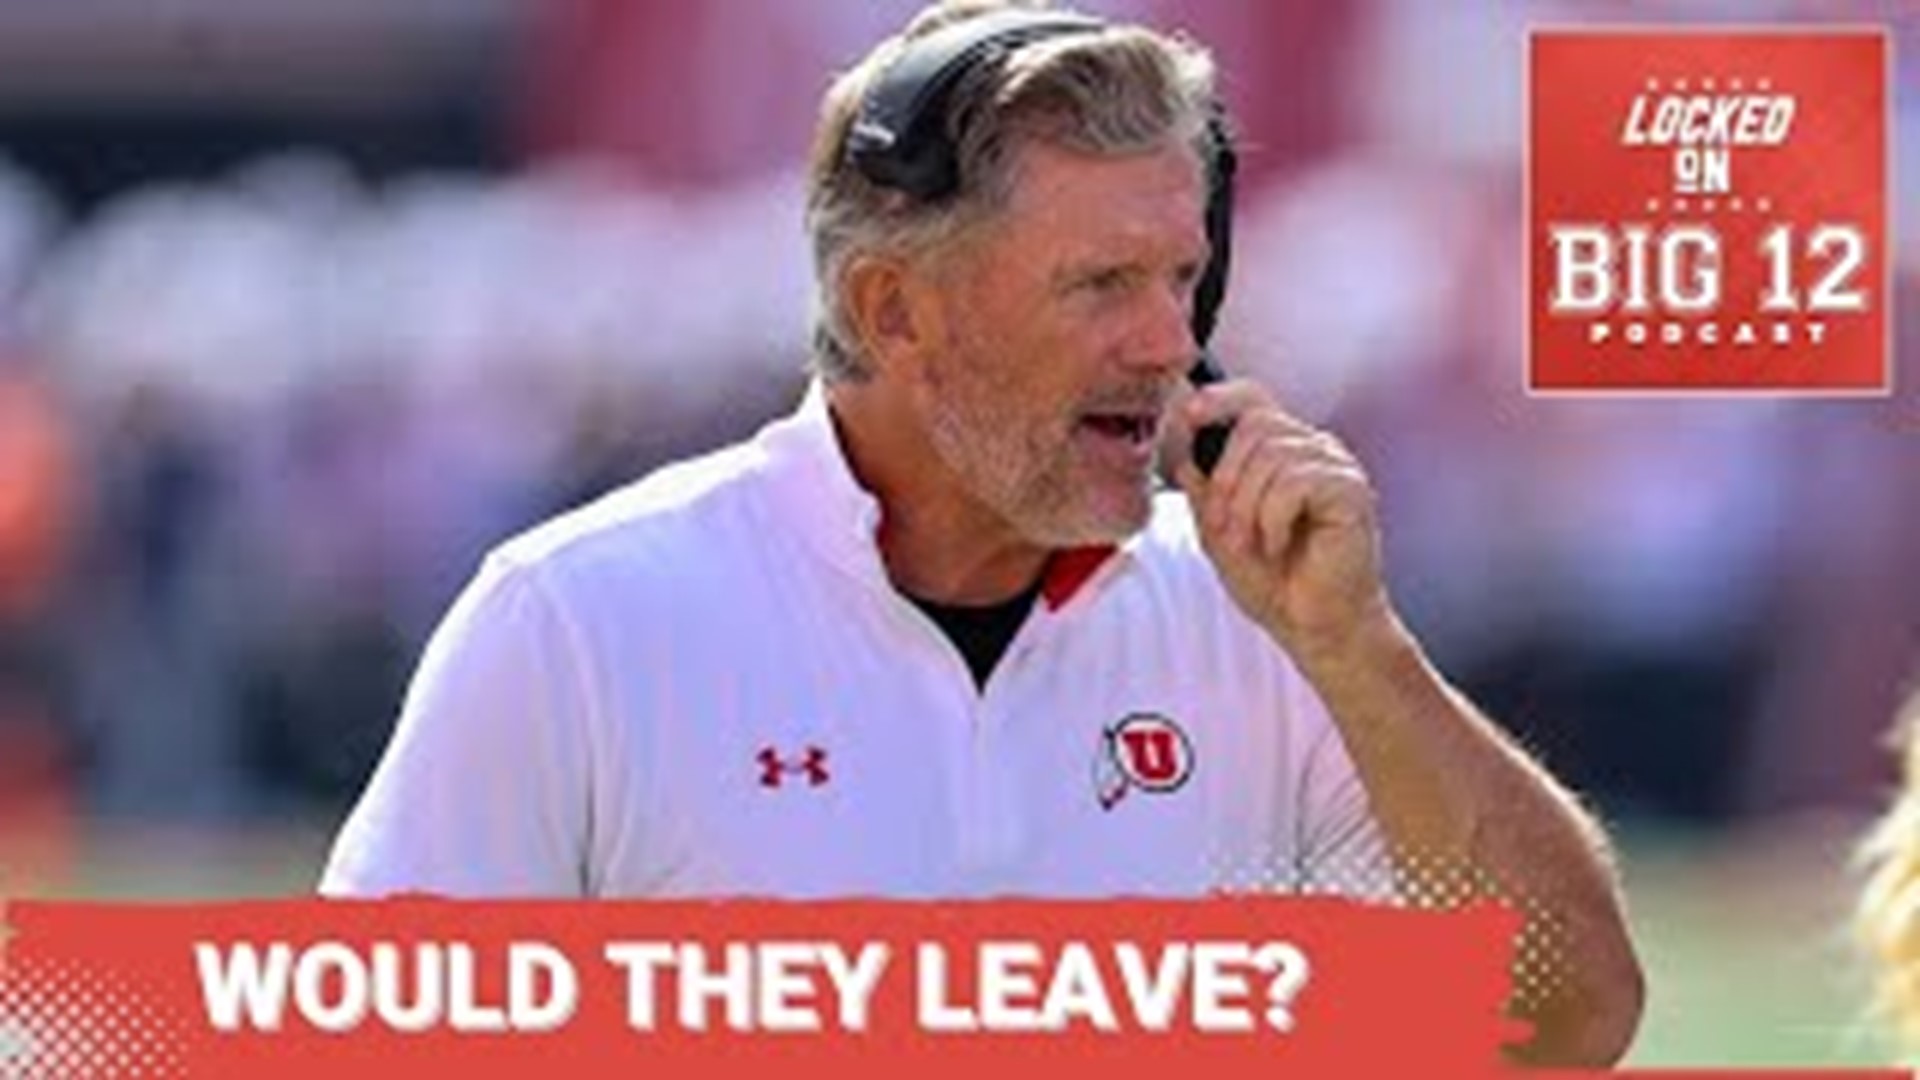 If Utah and TCU were to move from the Big 12 to the Big Ten, it would likely have significant implications for both conferences and the teams involved.